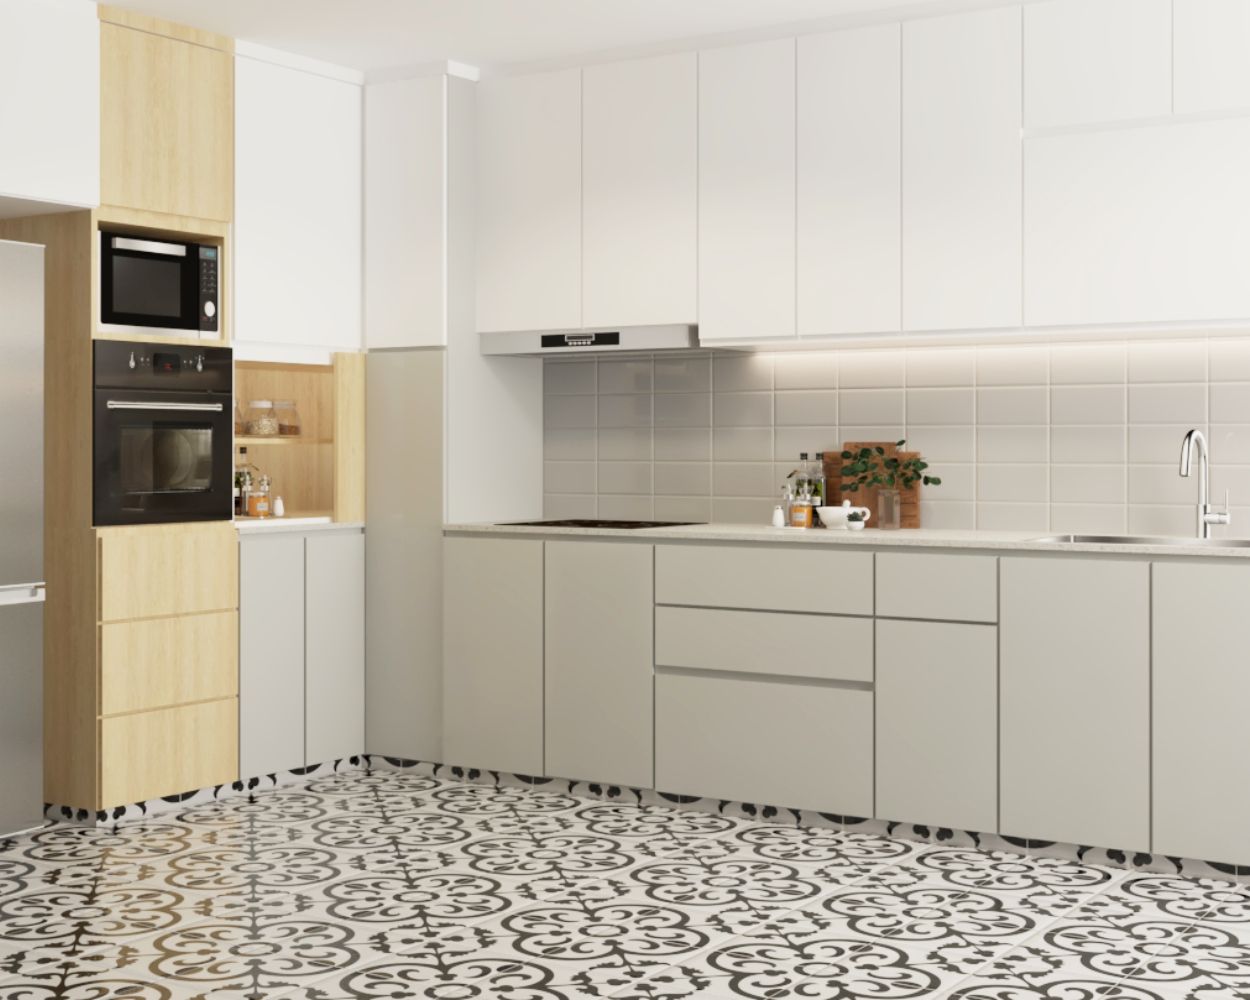 Contemporary Kitchen Flooring Design With Dual-Tone Tiles